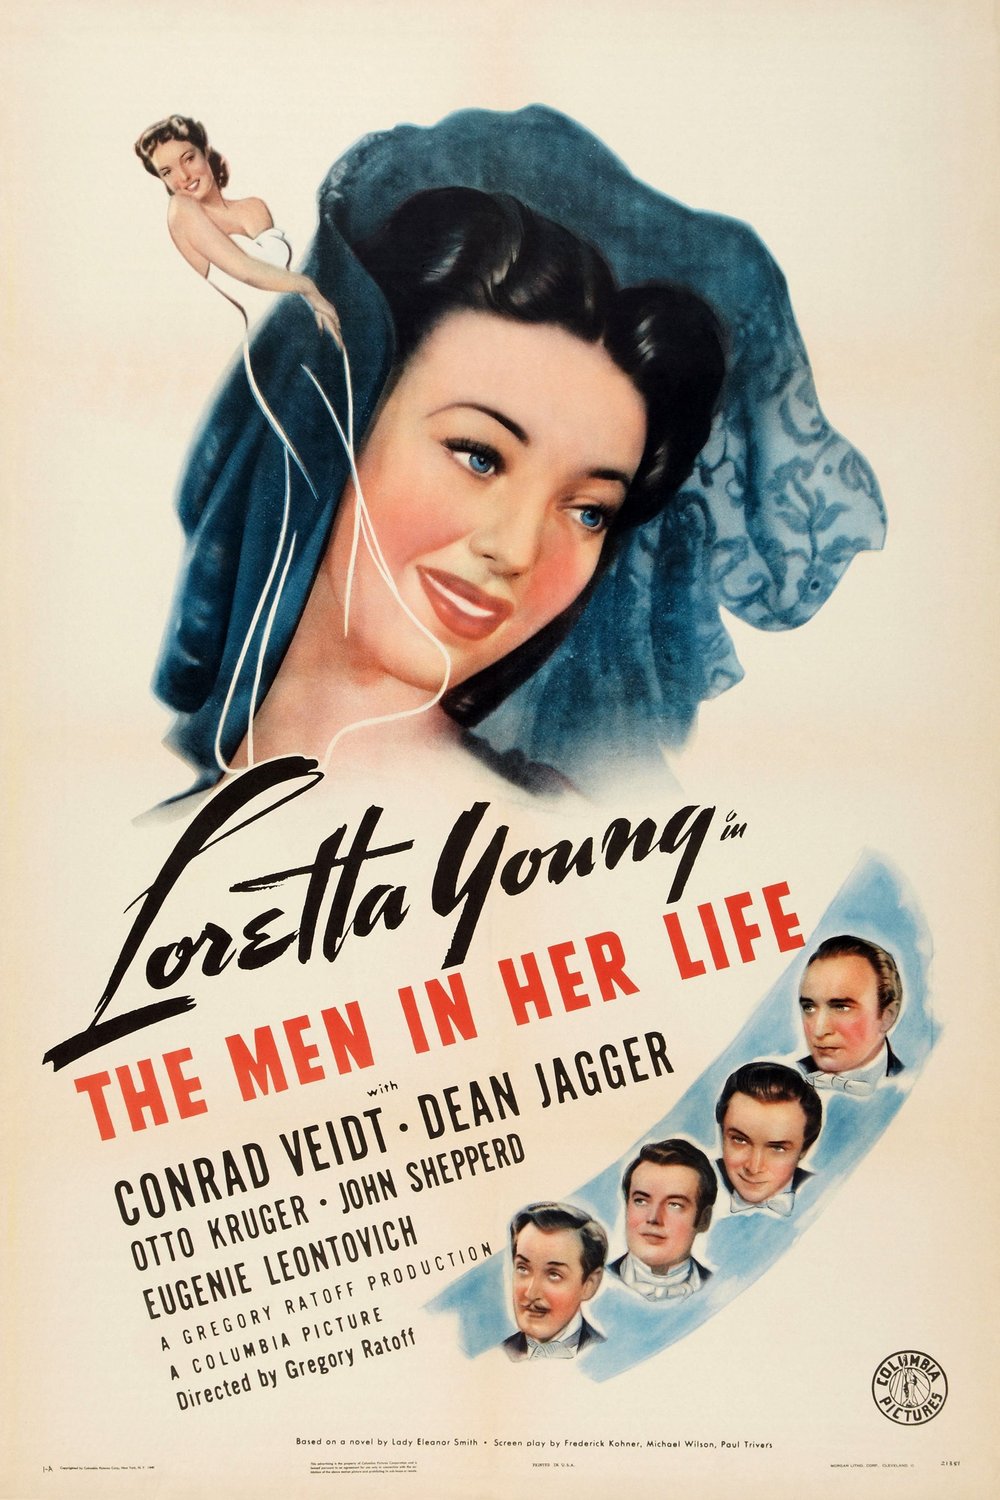 Poster of the movie The Men in Her Life